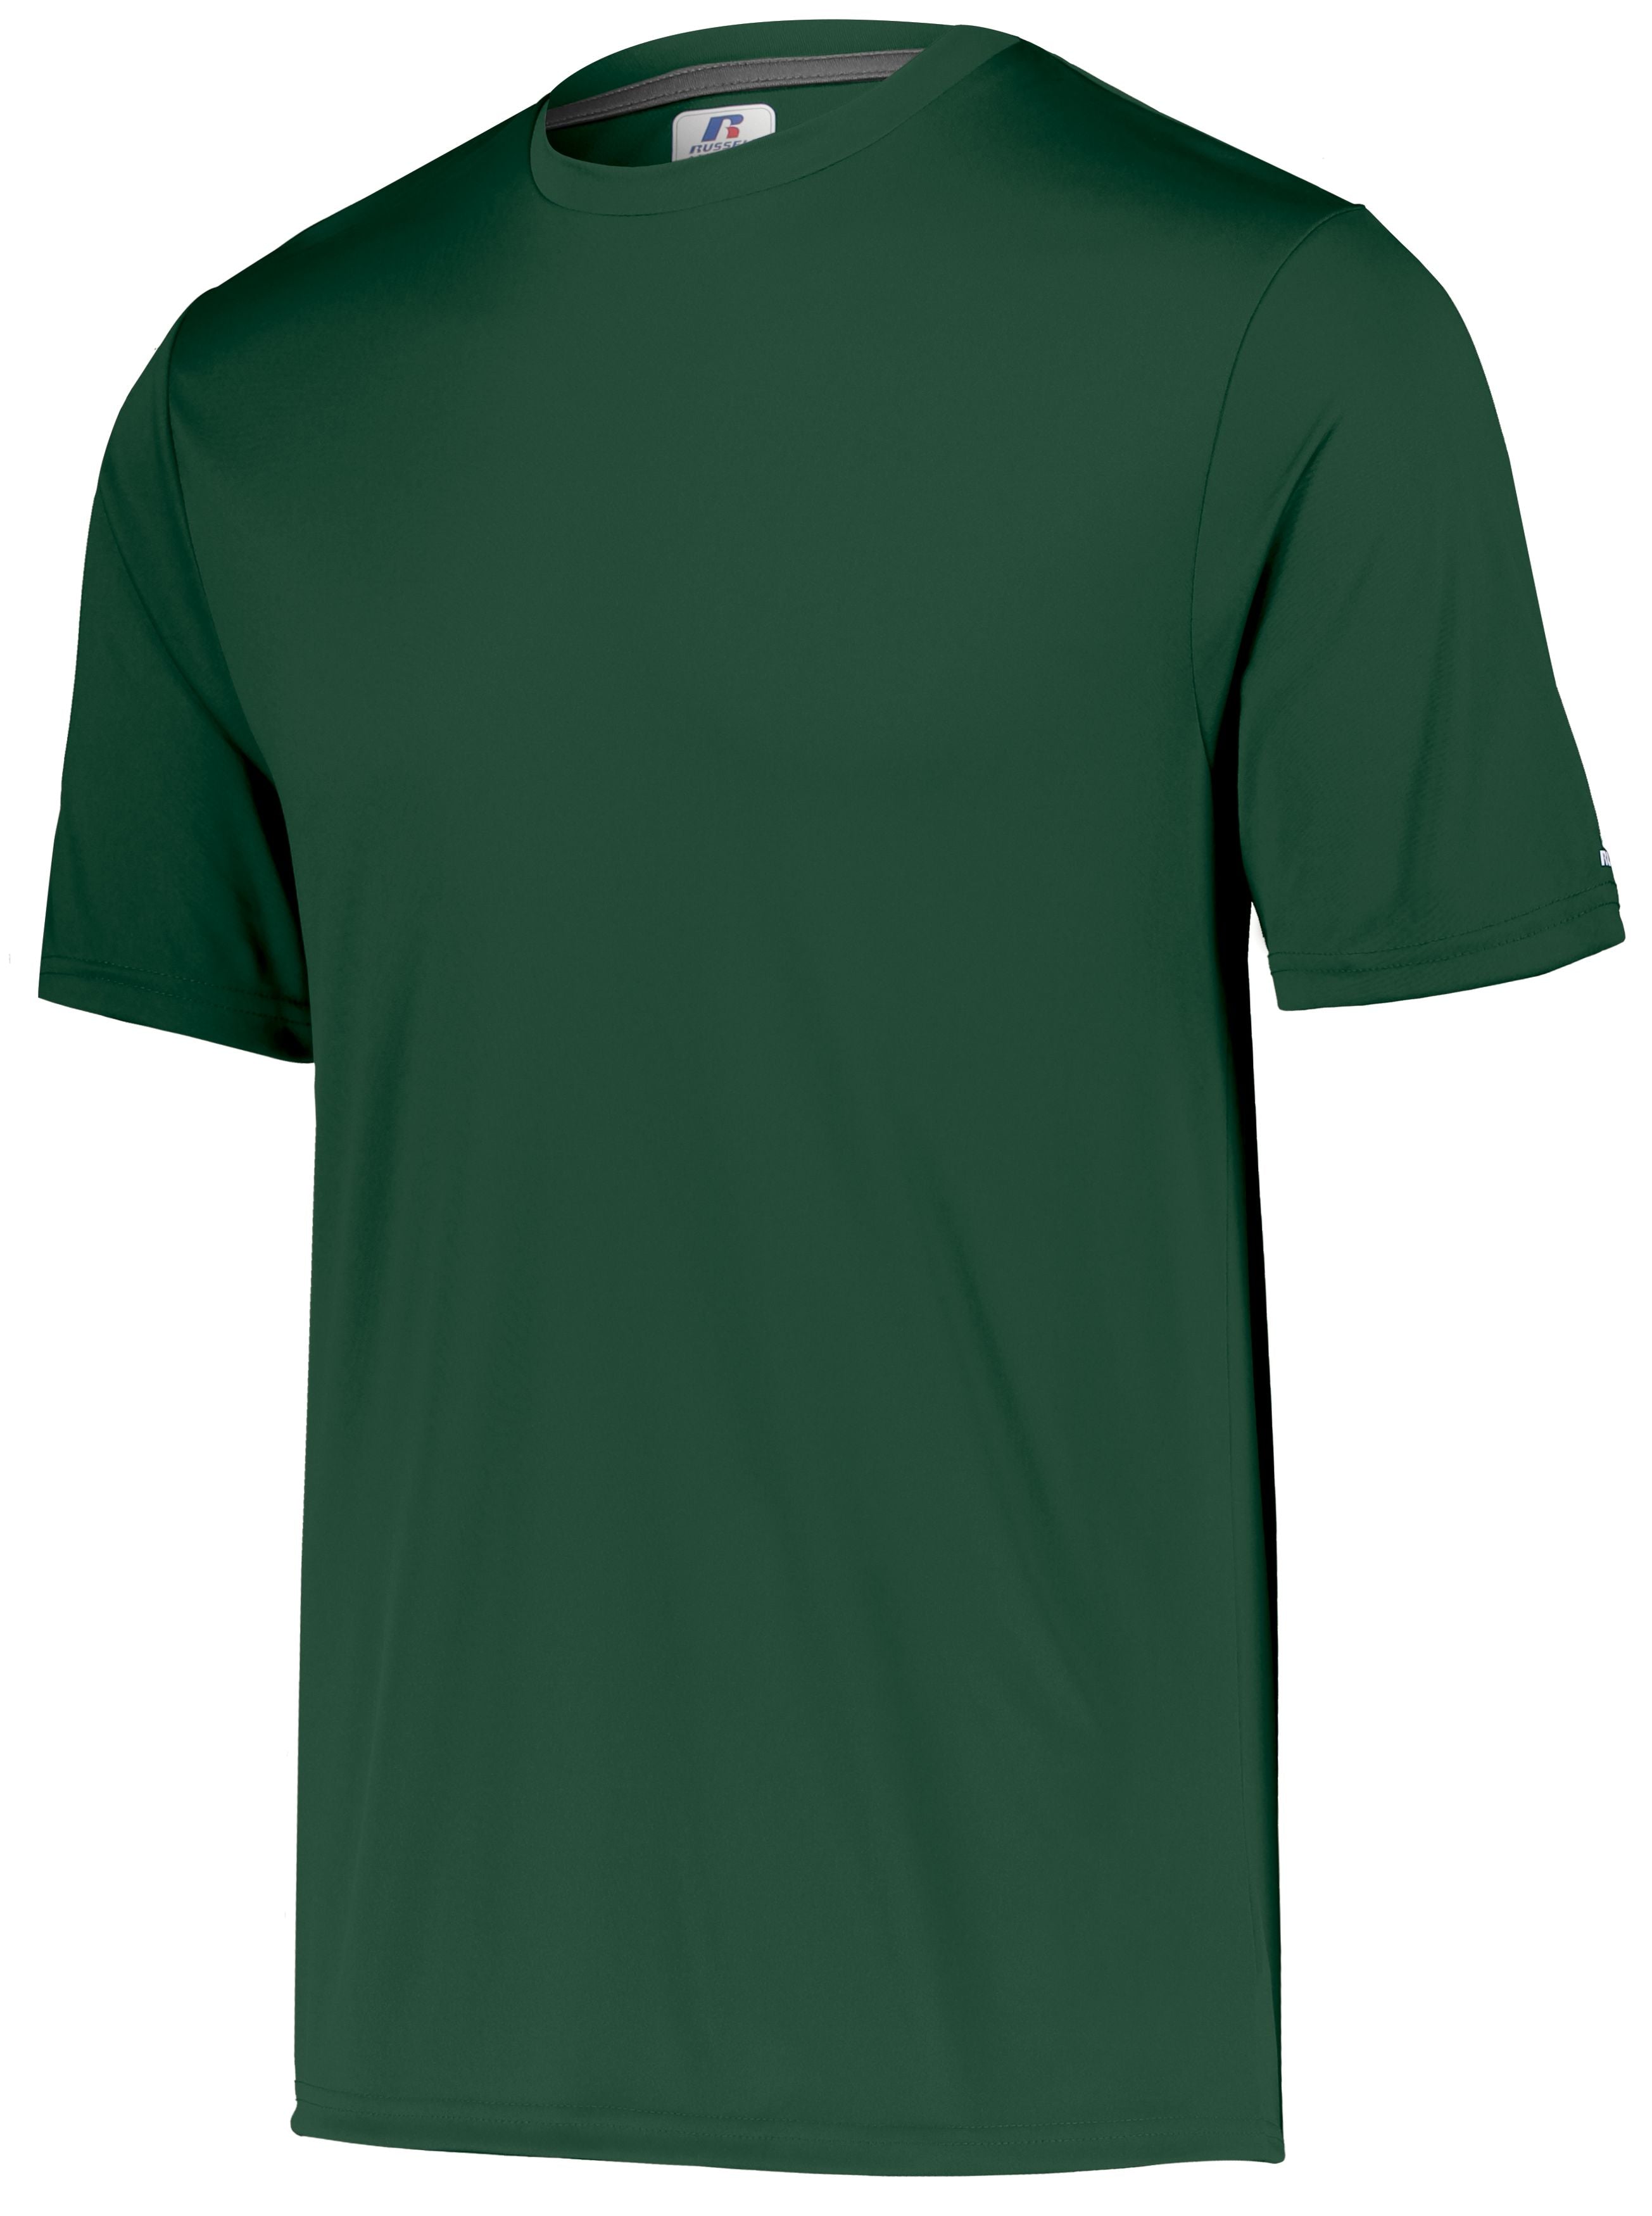 Russell Athletic Youth Dri-Power Core Performance Tee in Dark Green  -Part of the Youth, Youth-Tee-Shirt, T-Shirts, Russell-Athletic-Products, Shirts product lines at KanaleyCreations.com